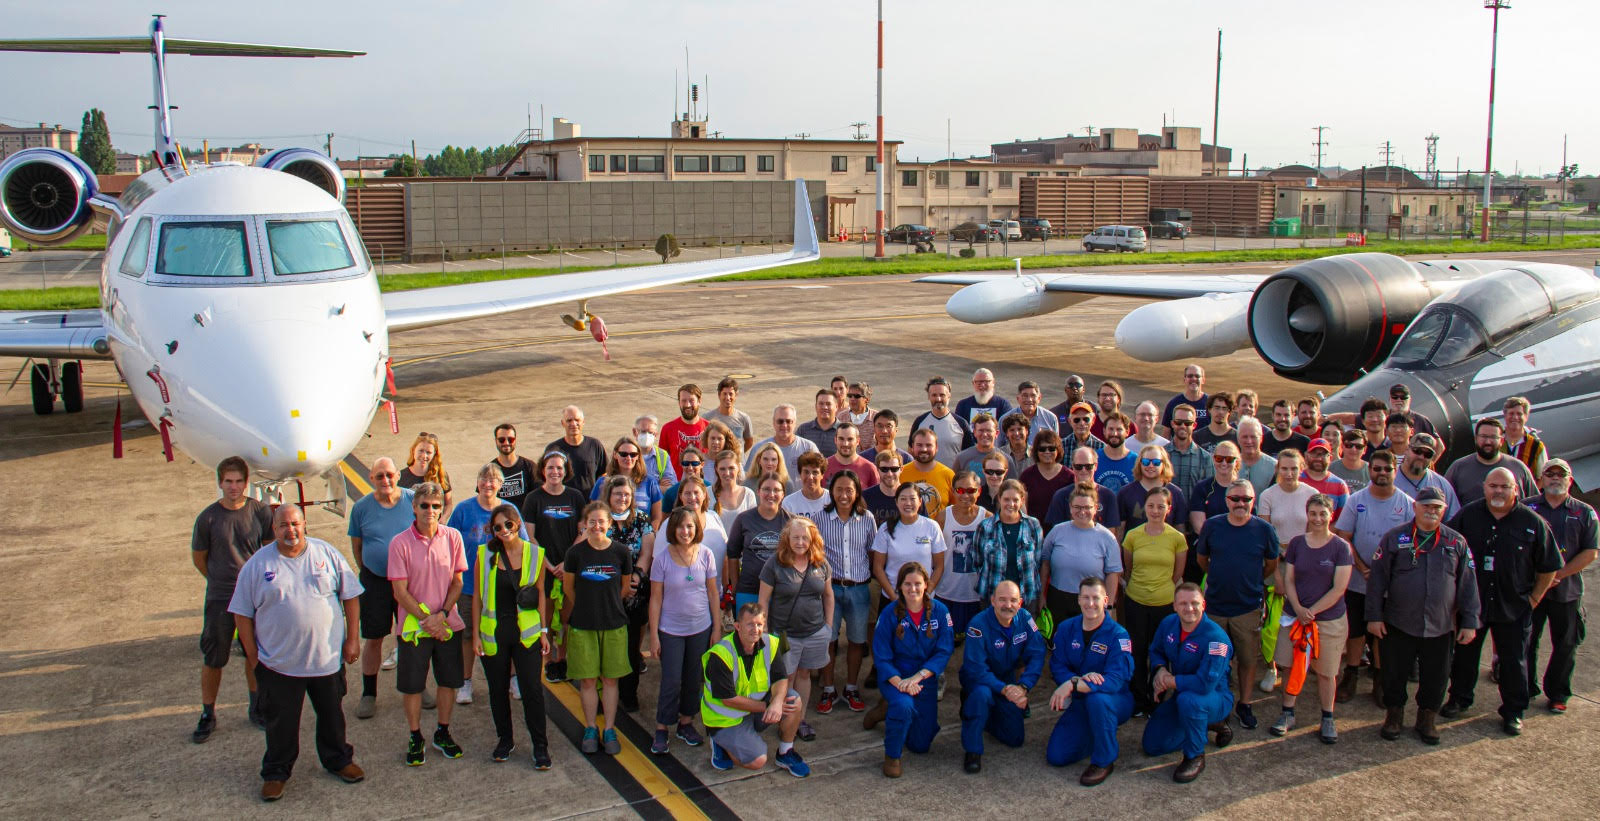 Can you believe it? The NCAR and NASA #ACCLIP team held still enough for a group photo and their research aircraft too! A massive shout out to everyone who made this research possible! #nsffunded #NSFGEO #ChemistryThatMatters @NCAR_ACOM @LASPatCU @UMiamiRSMAS @NOAA_ESRL